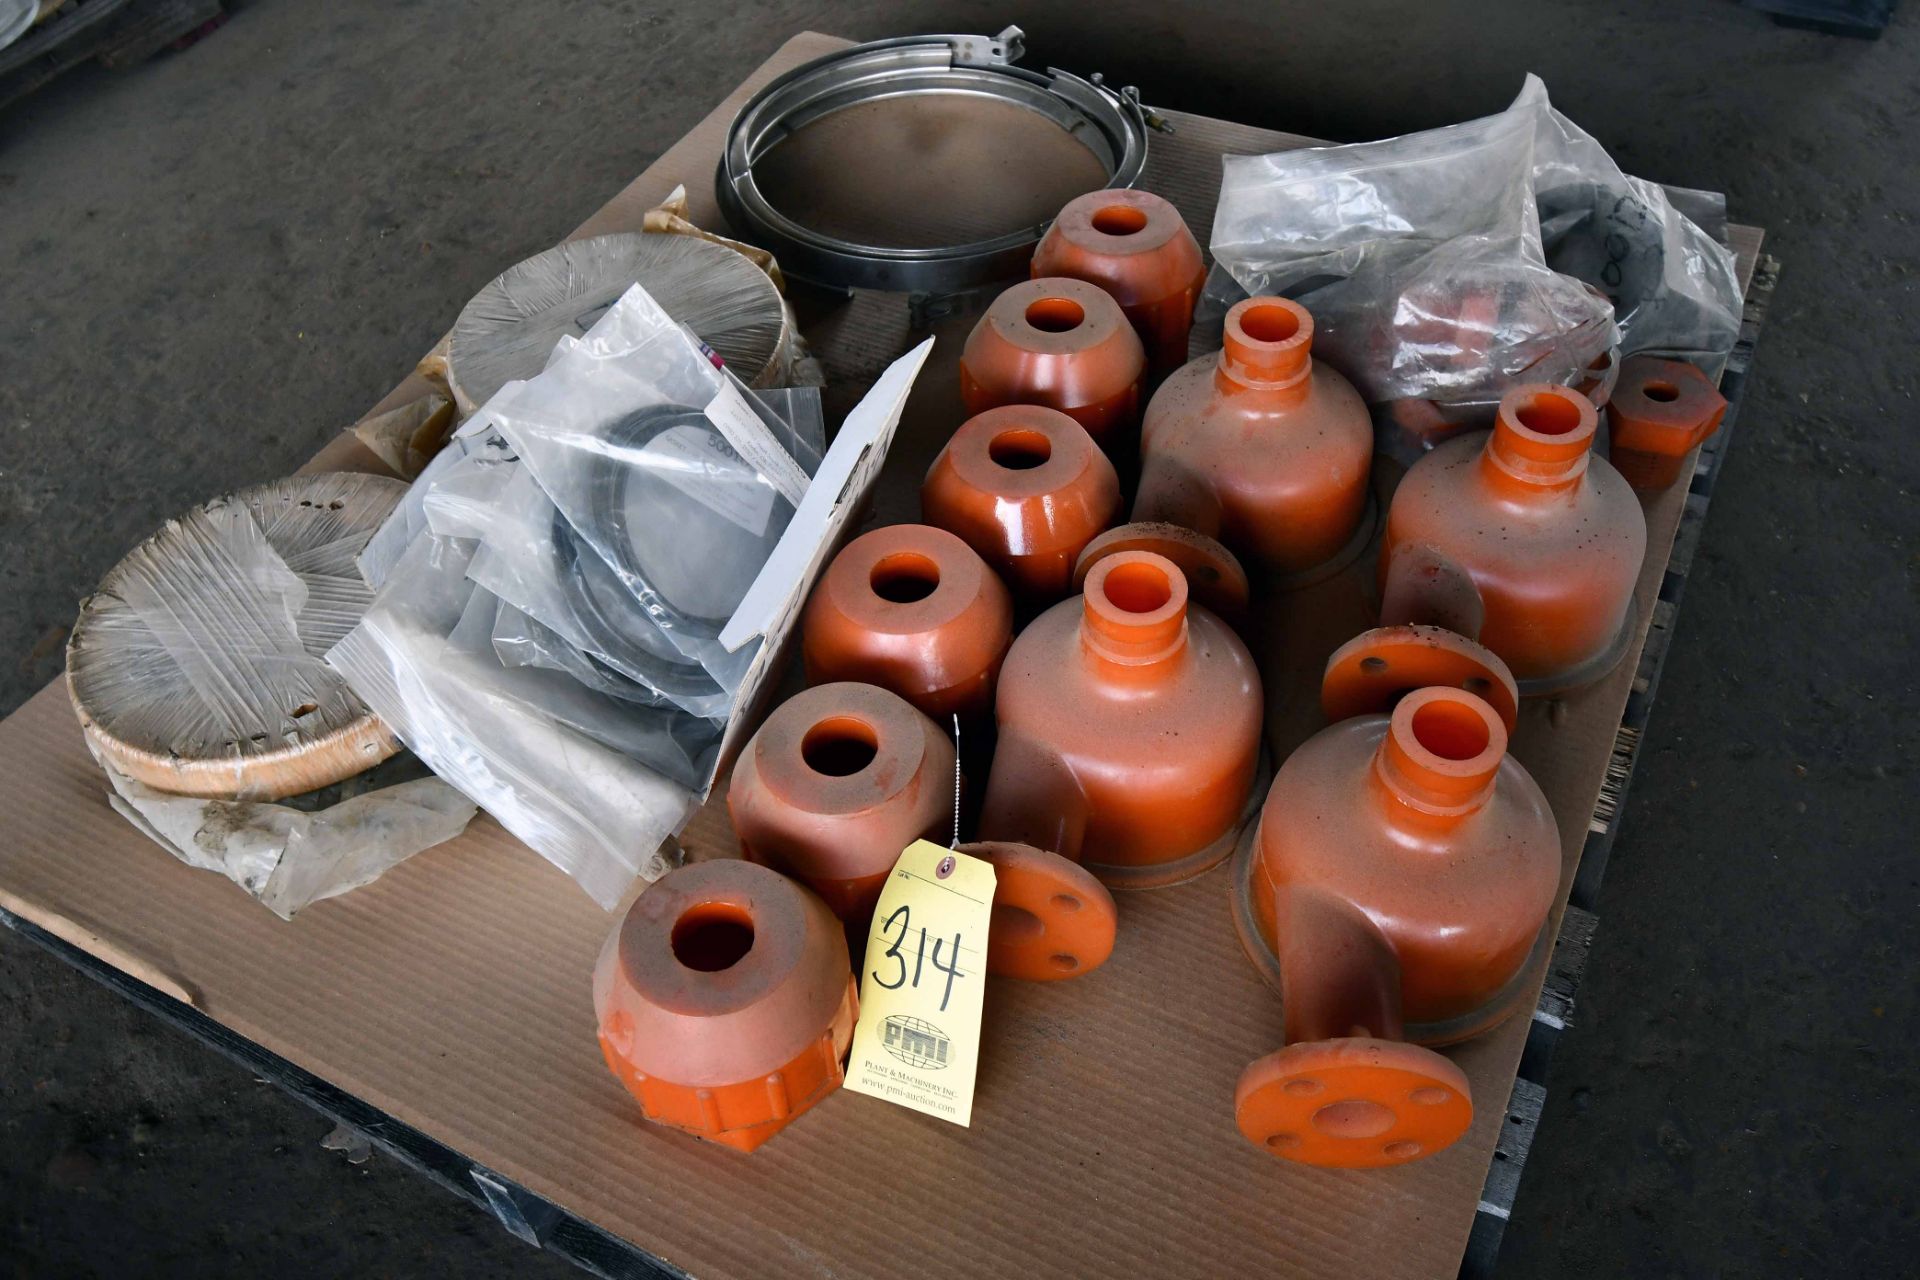 LOT OF PUMP PARTS (on one pallet) (Location: MDS Boring & Drilling, 11900 Hirsch Road, Houston, TX